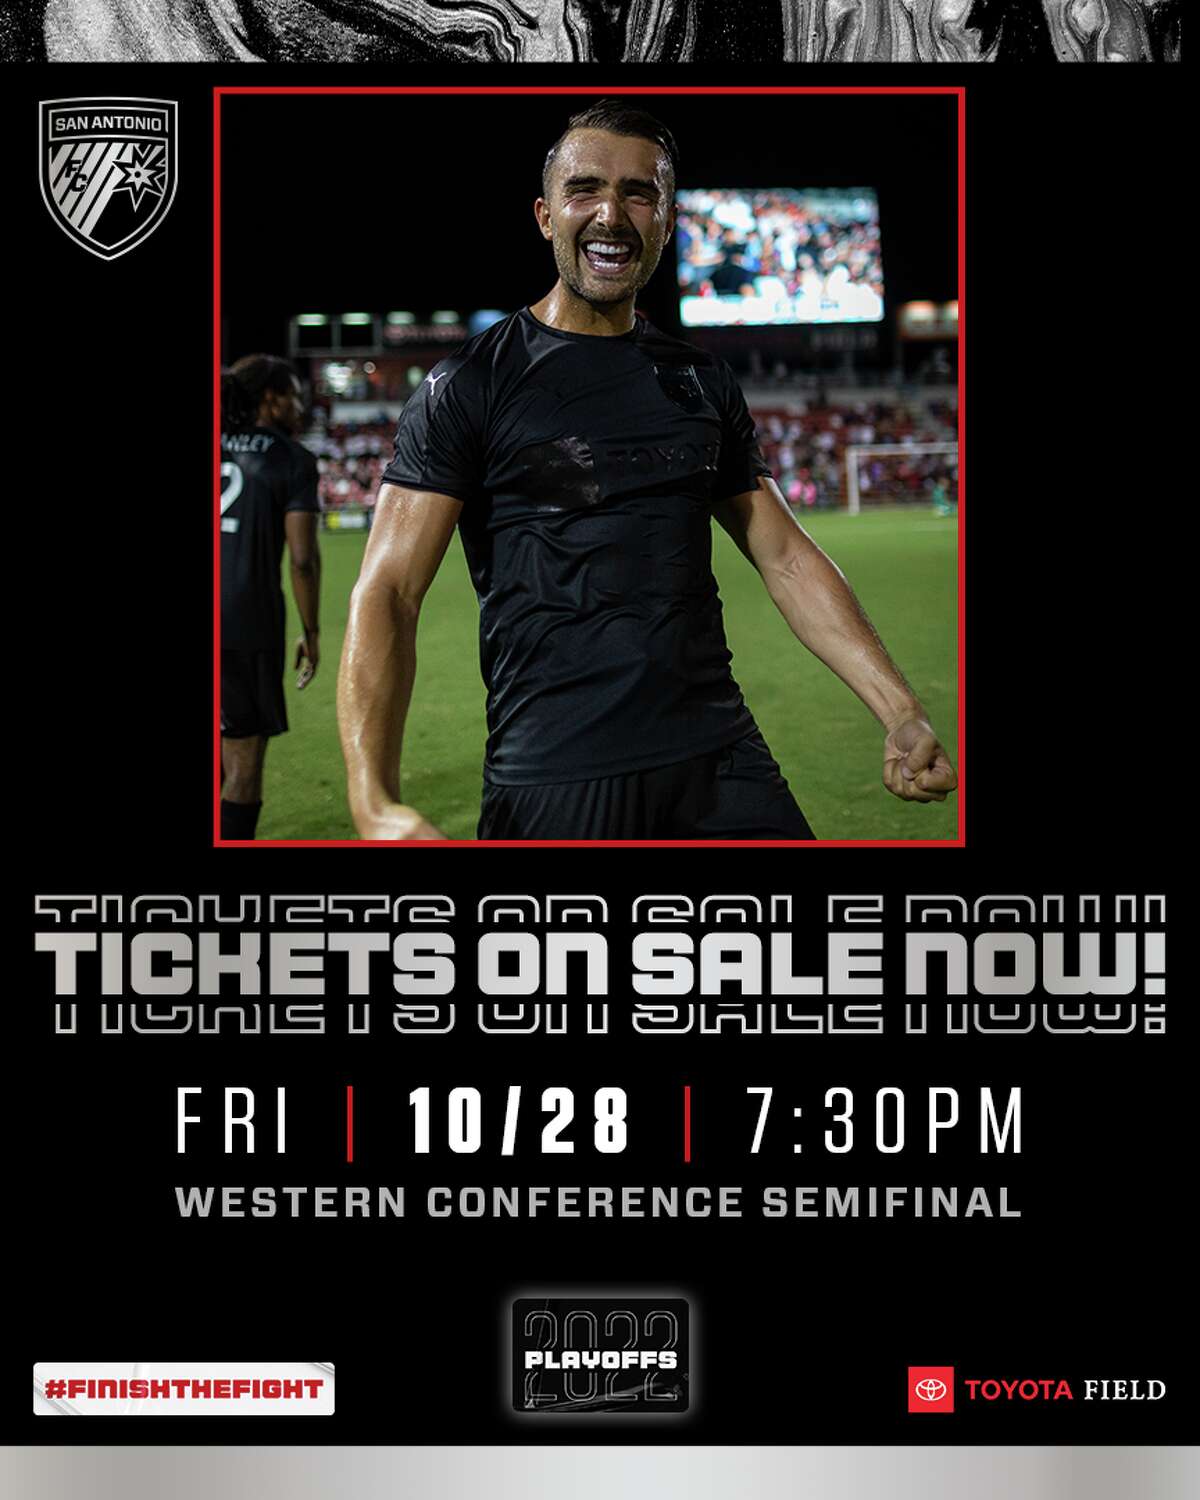 Finish the fight with SAFC by purchasing your semifinal tickets today